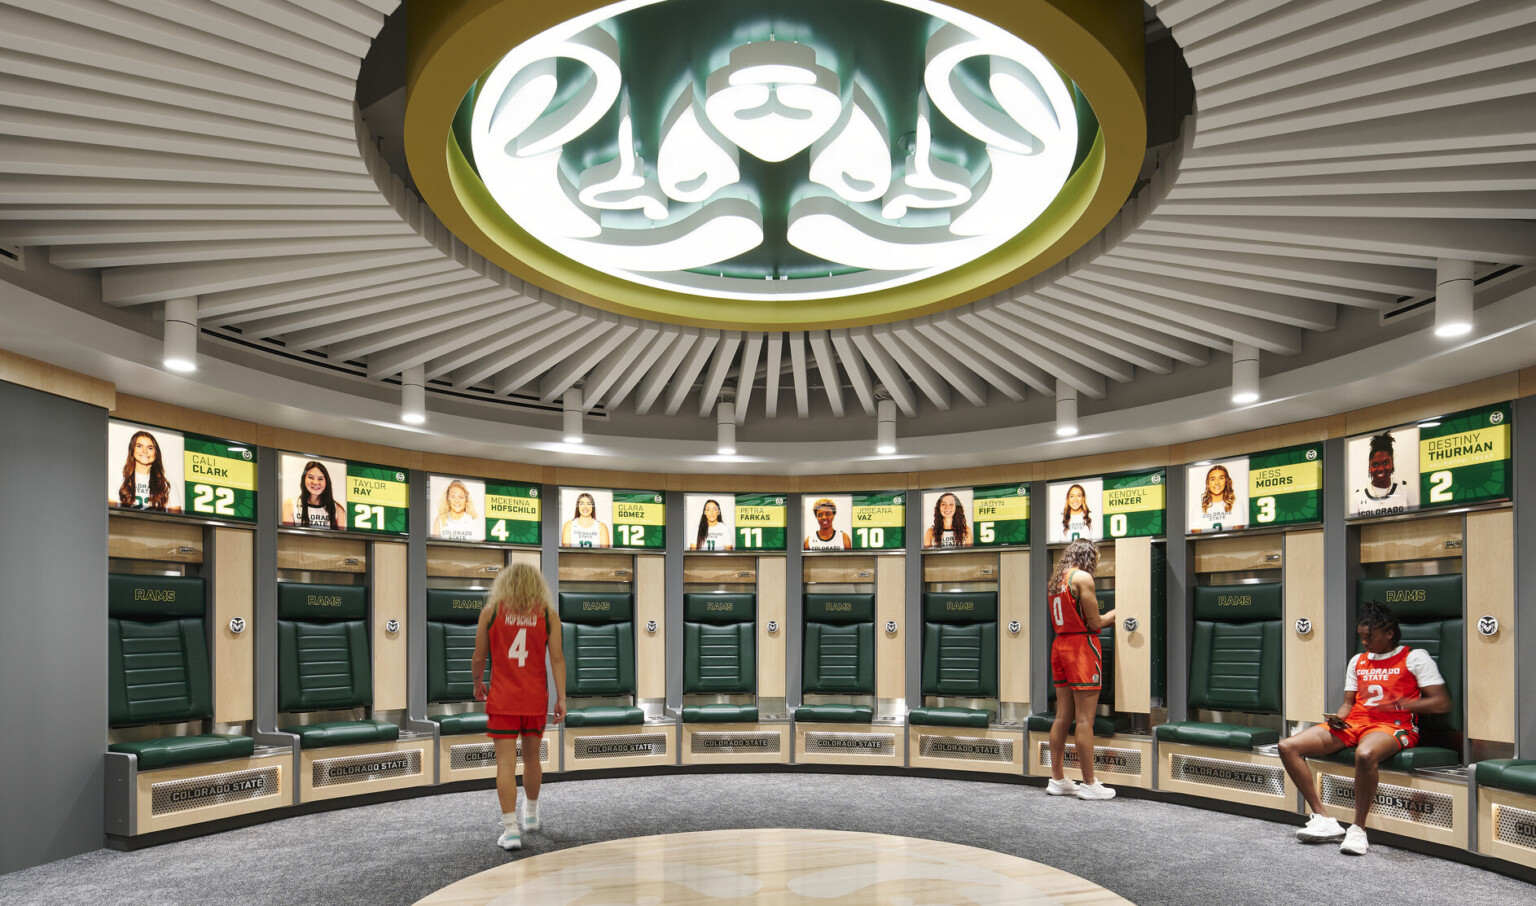 team branding, large Rams logo emblem adorns the ceiling, lockers for the women athletes with illuminated picture and jersey numbers of each athletes locker with private seating